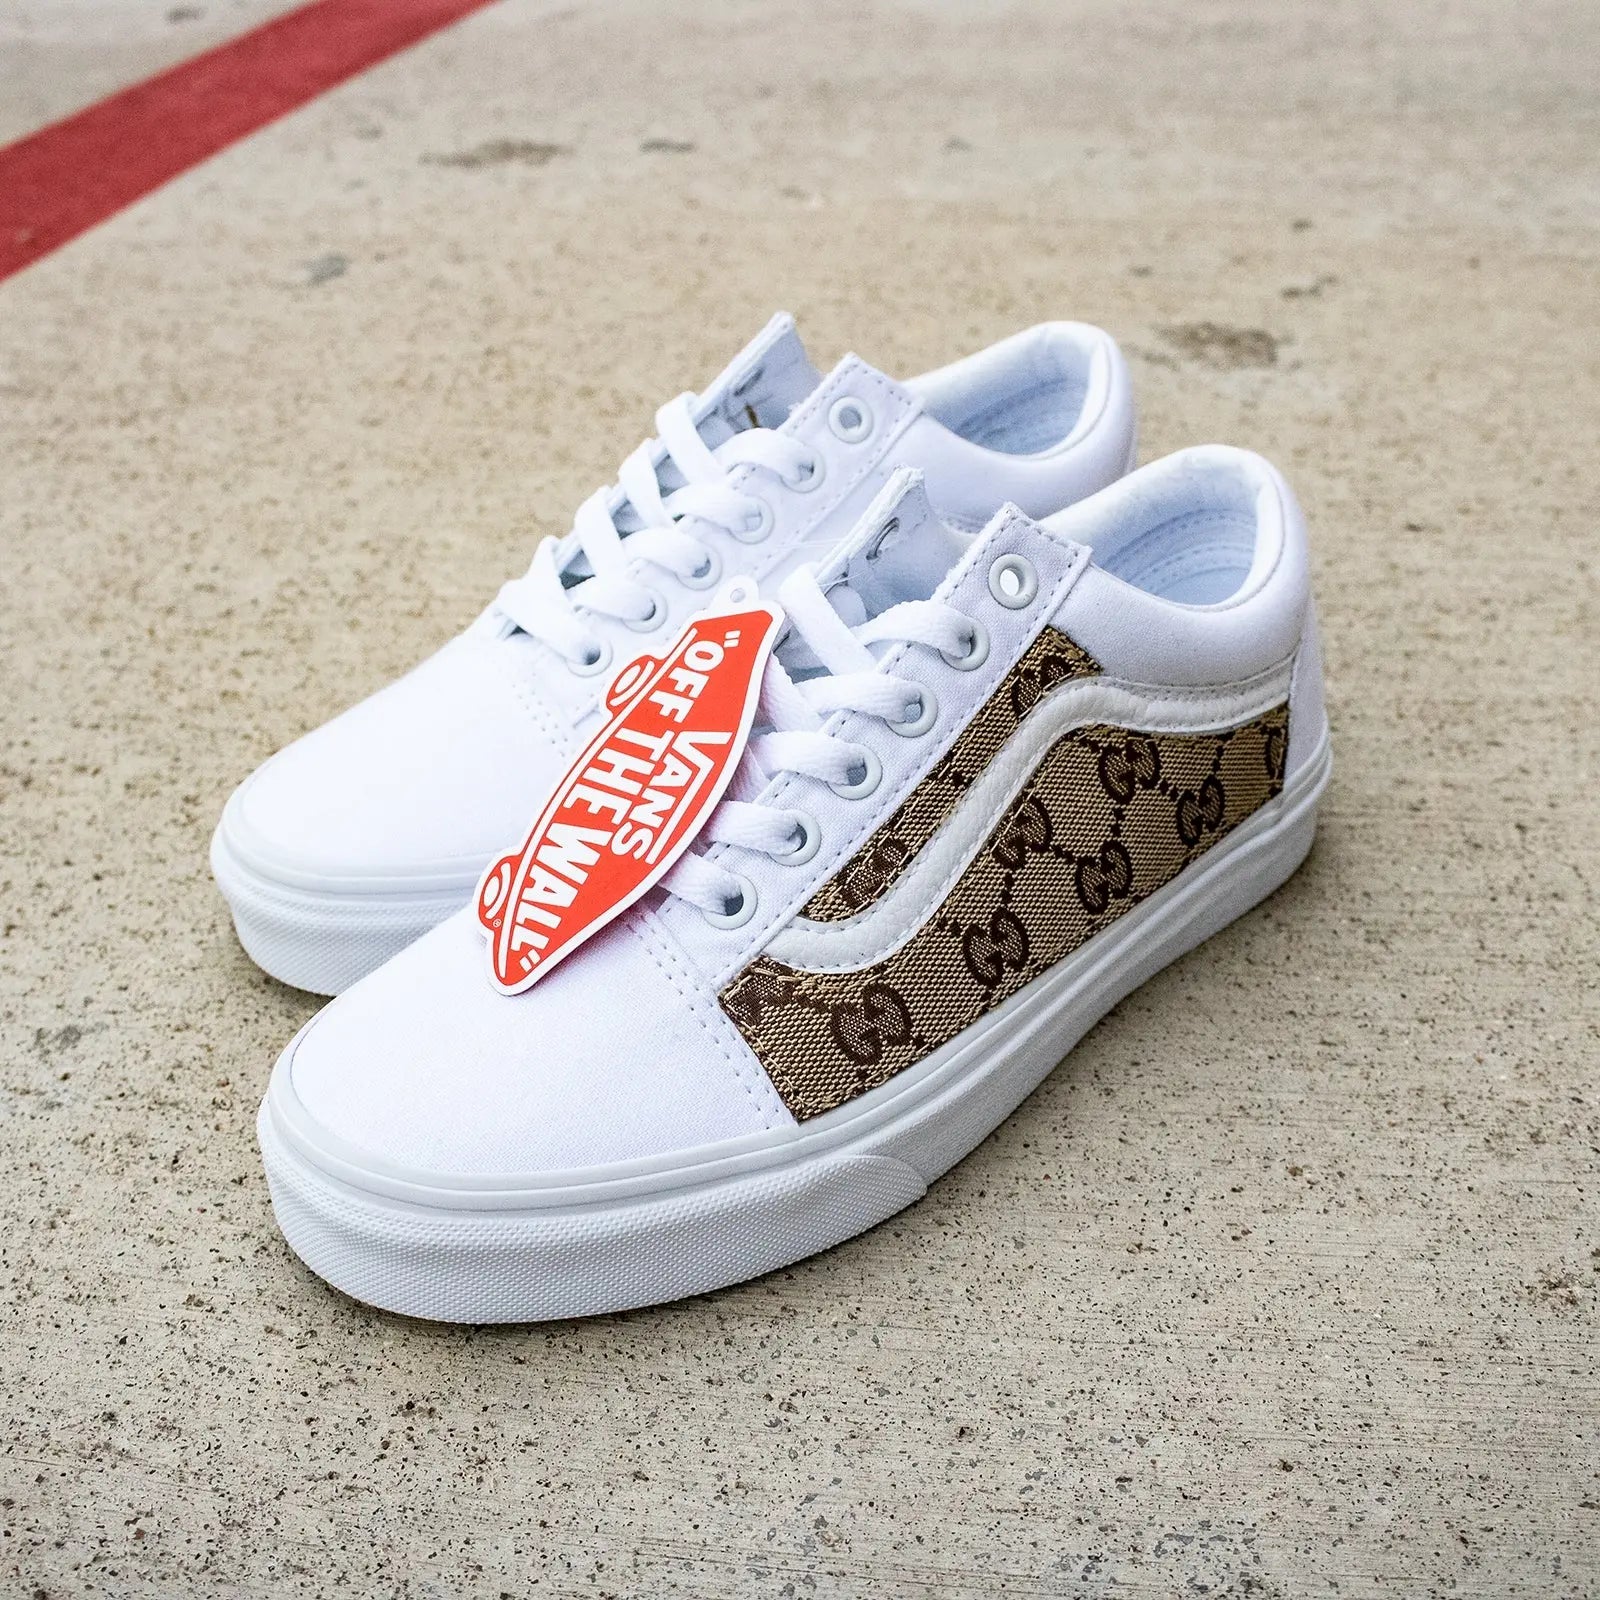 Vans White Old Skool x Authentic GG Fabric Custom Handmade Shoes By Patch Collection 